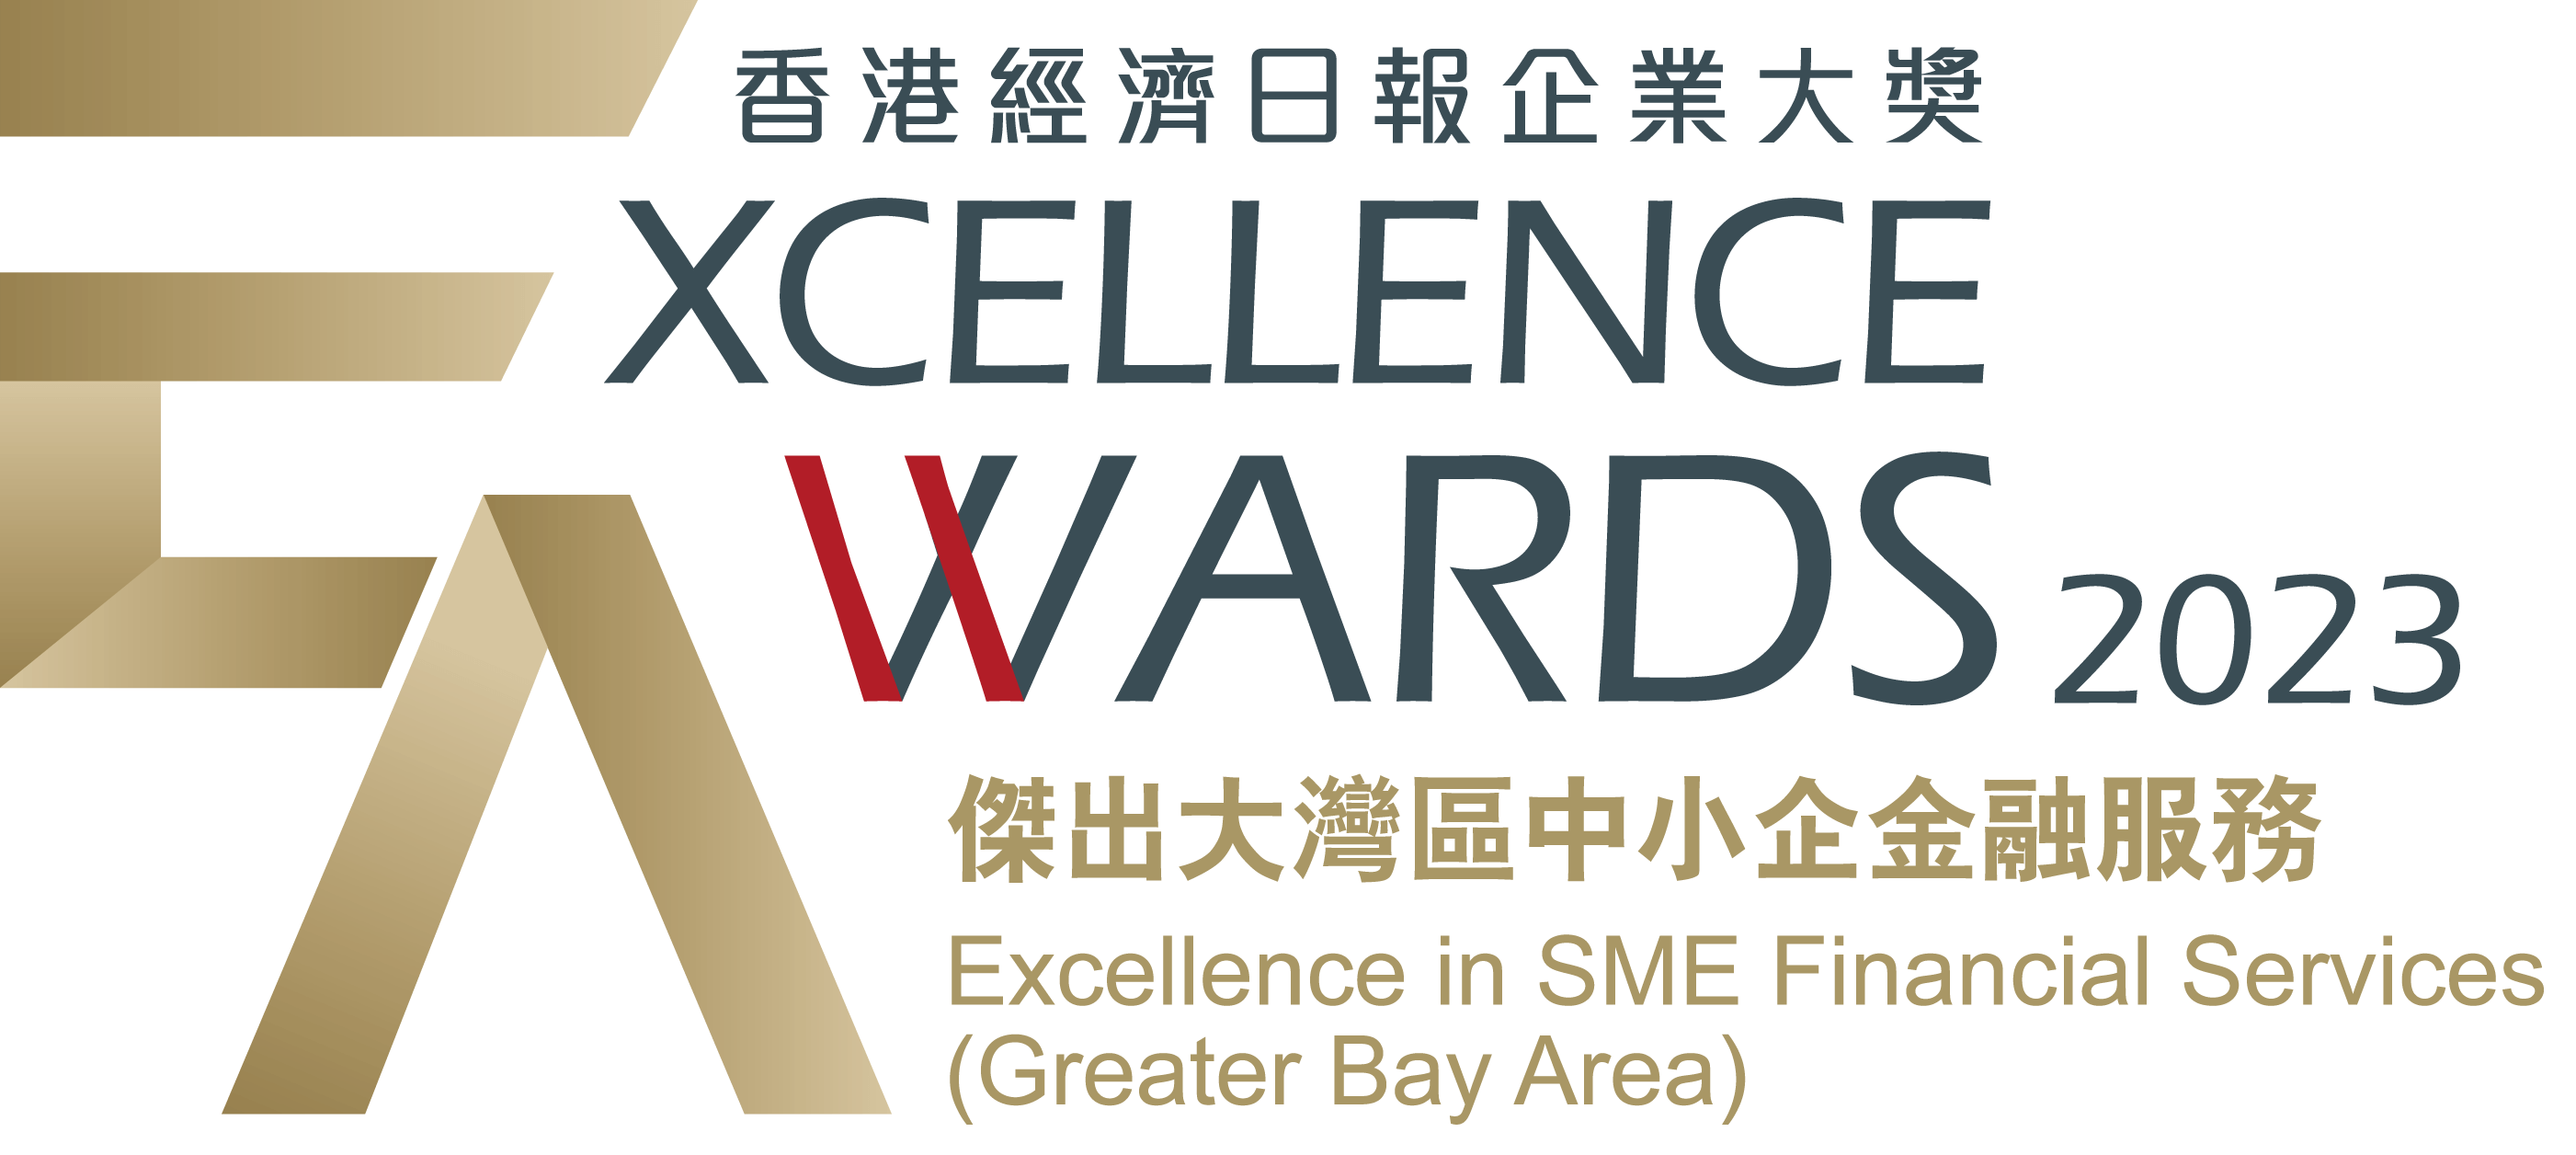 HKET Excellence Awards 2023<br/>“Excellence in SME Financial Services (Greater Bay Area)”